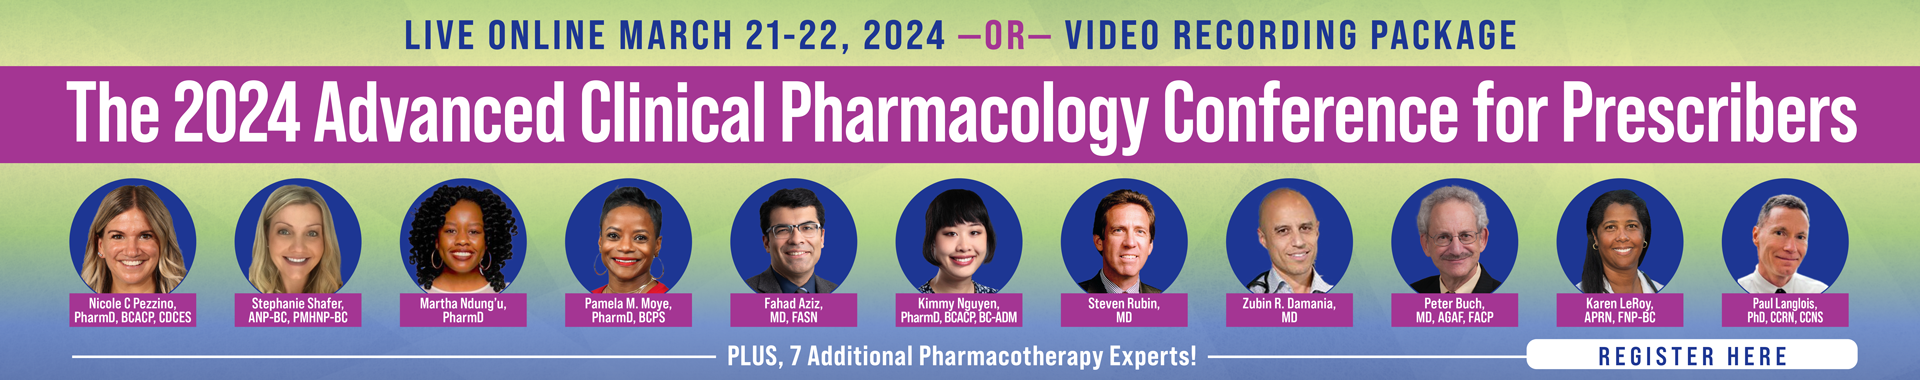 The 2024 Advanced Clinical Pharmacology Conference for Prescribers